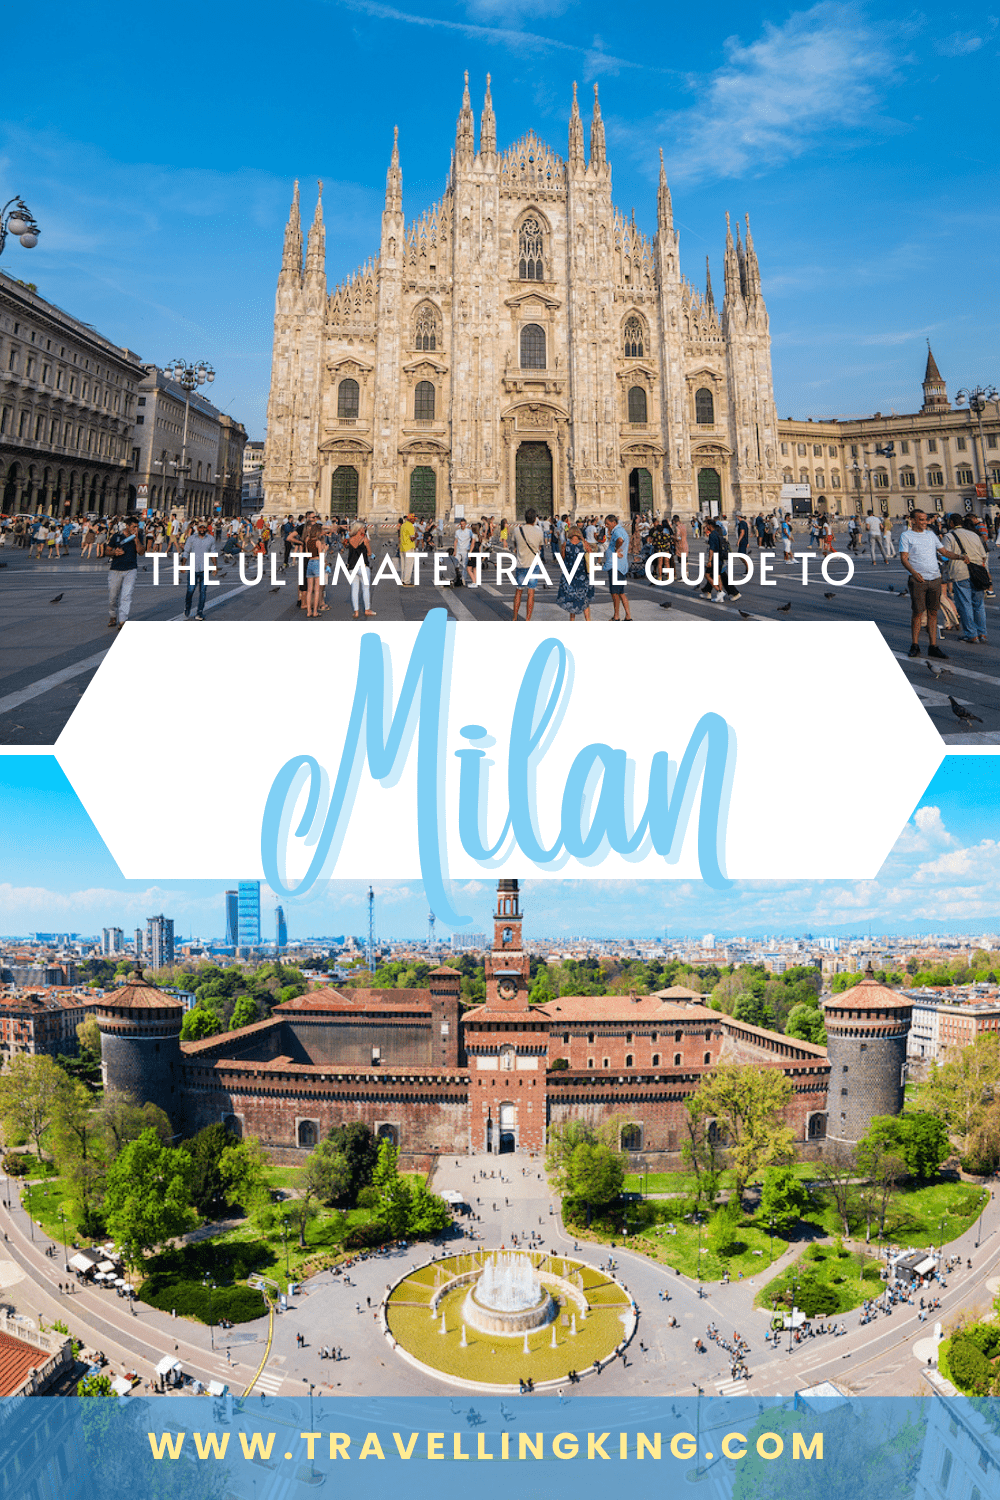 The Ultimate Travel Guide to Milan